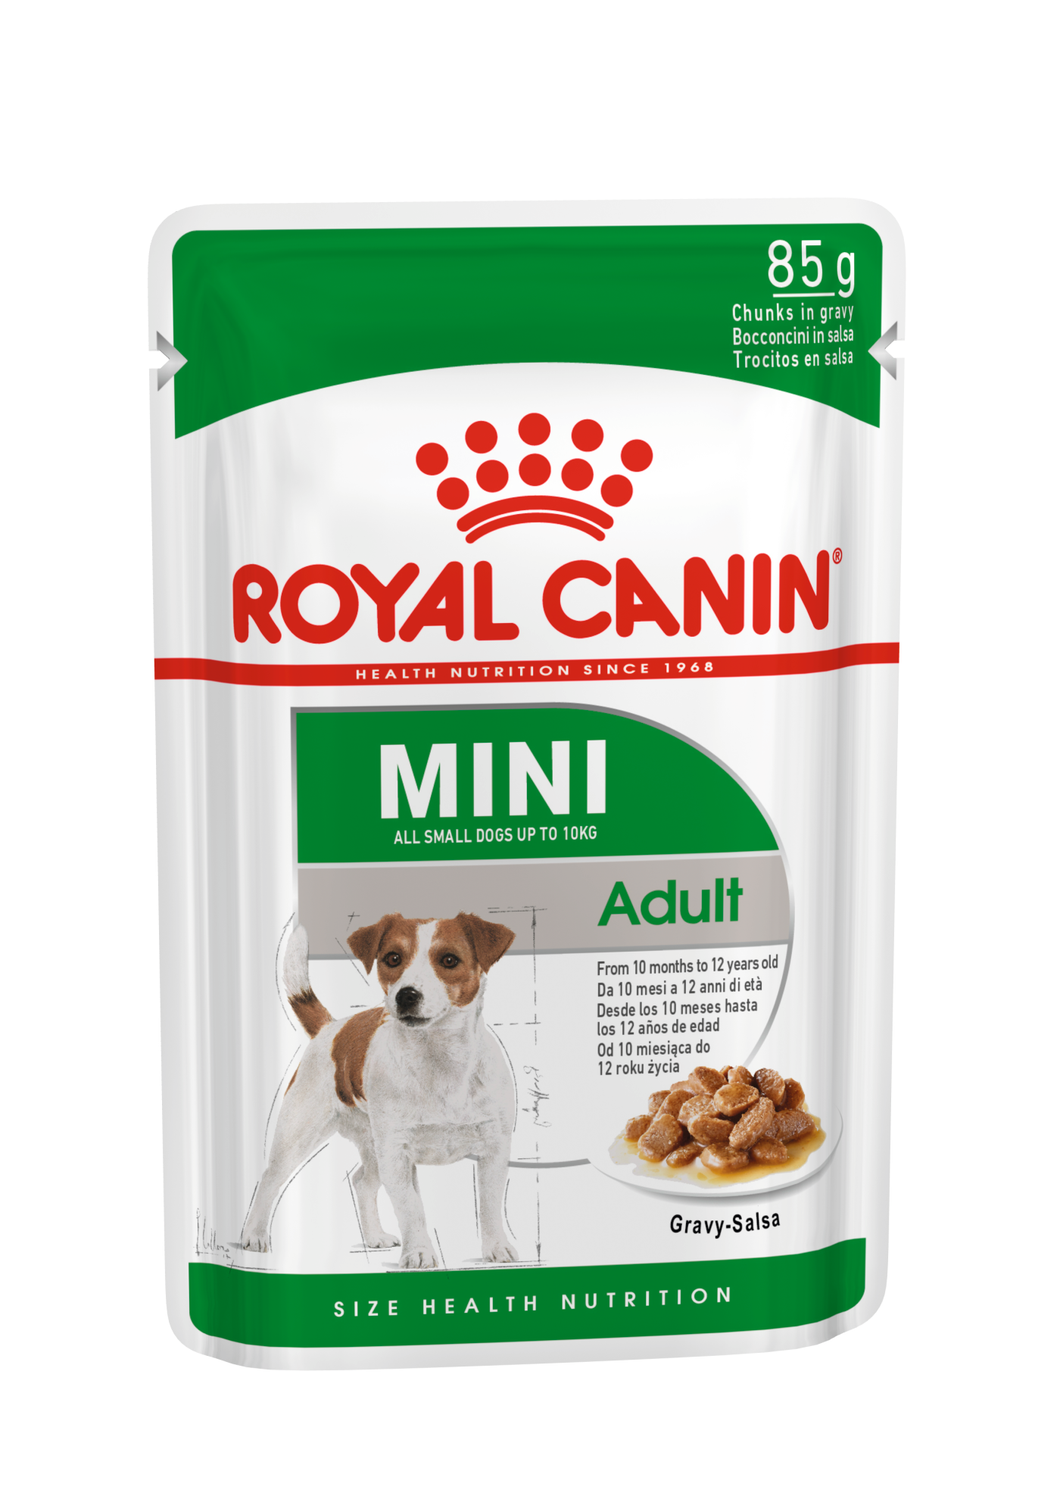 ROYAL CANIN Mini Adult Wet Food Pouches